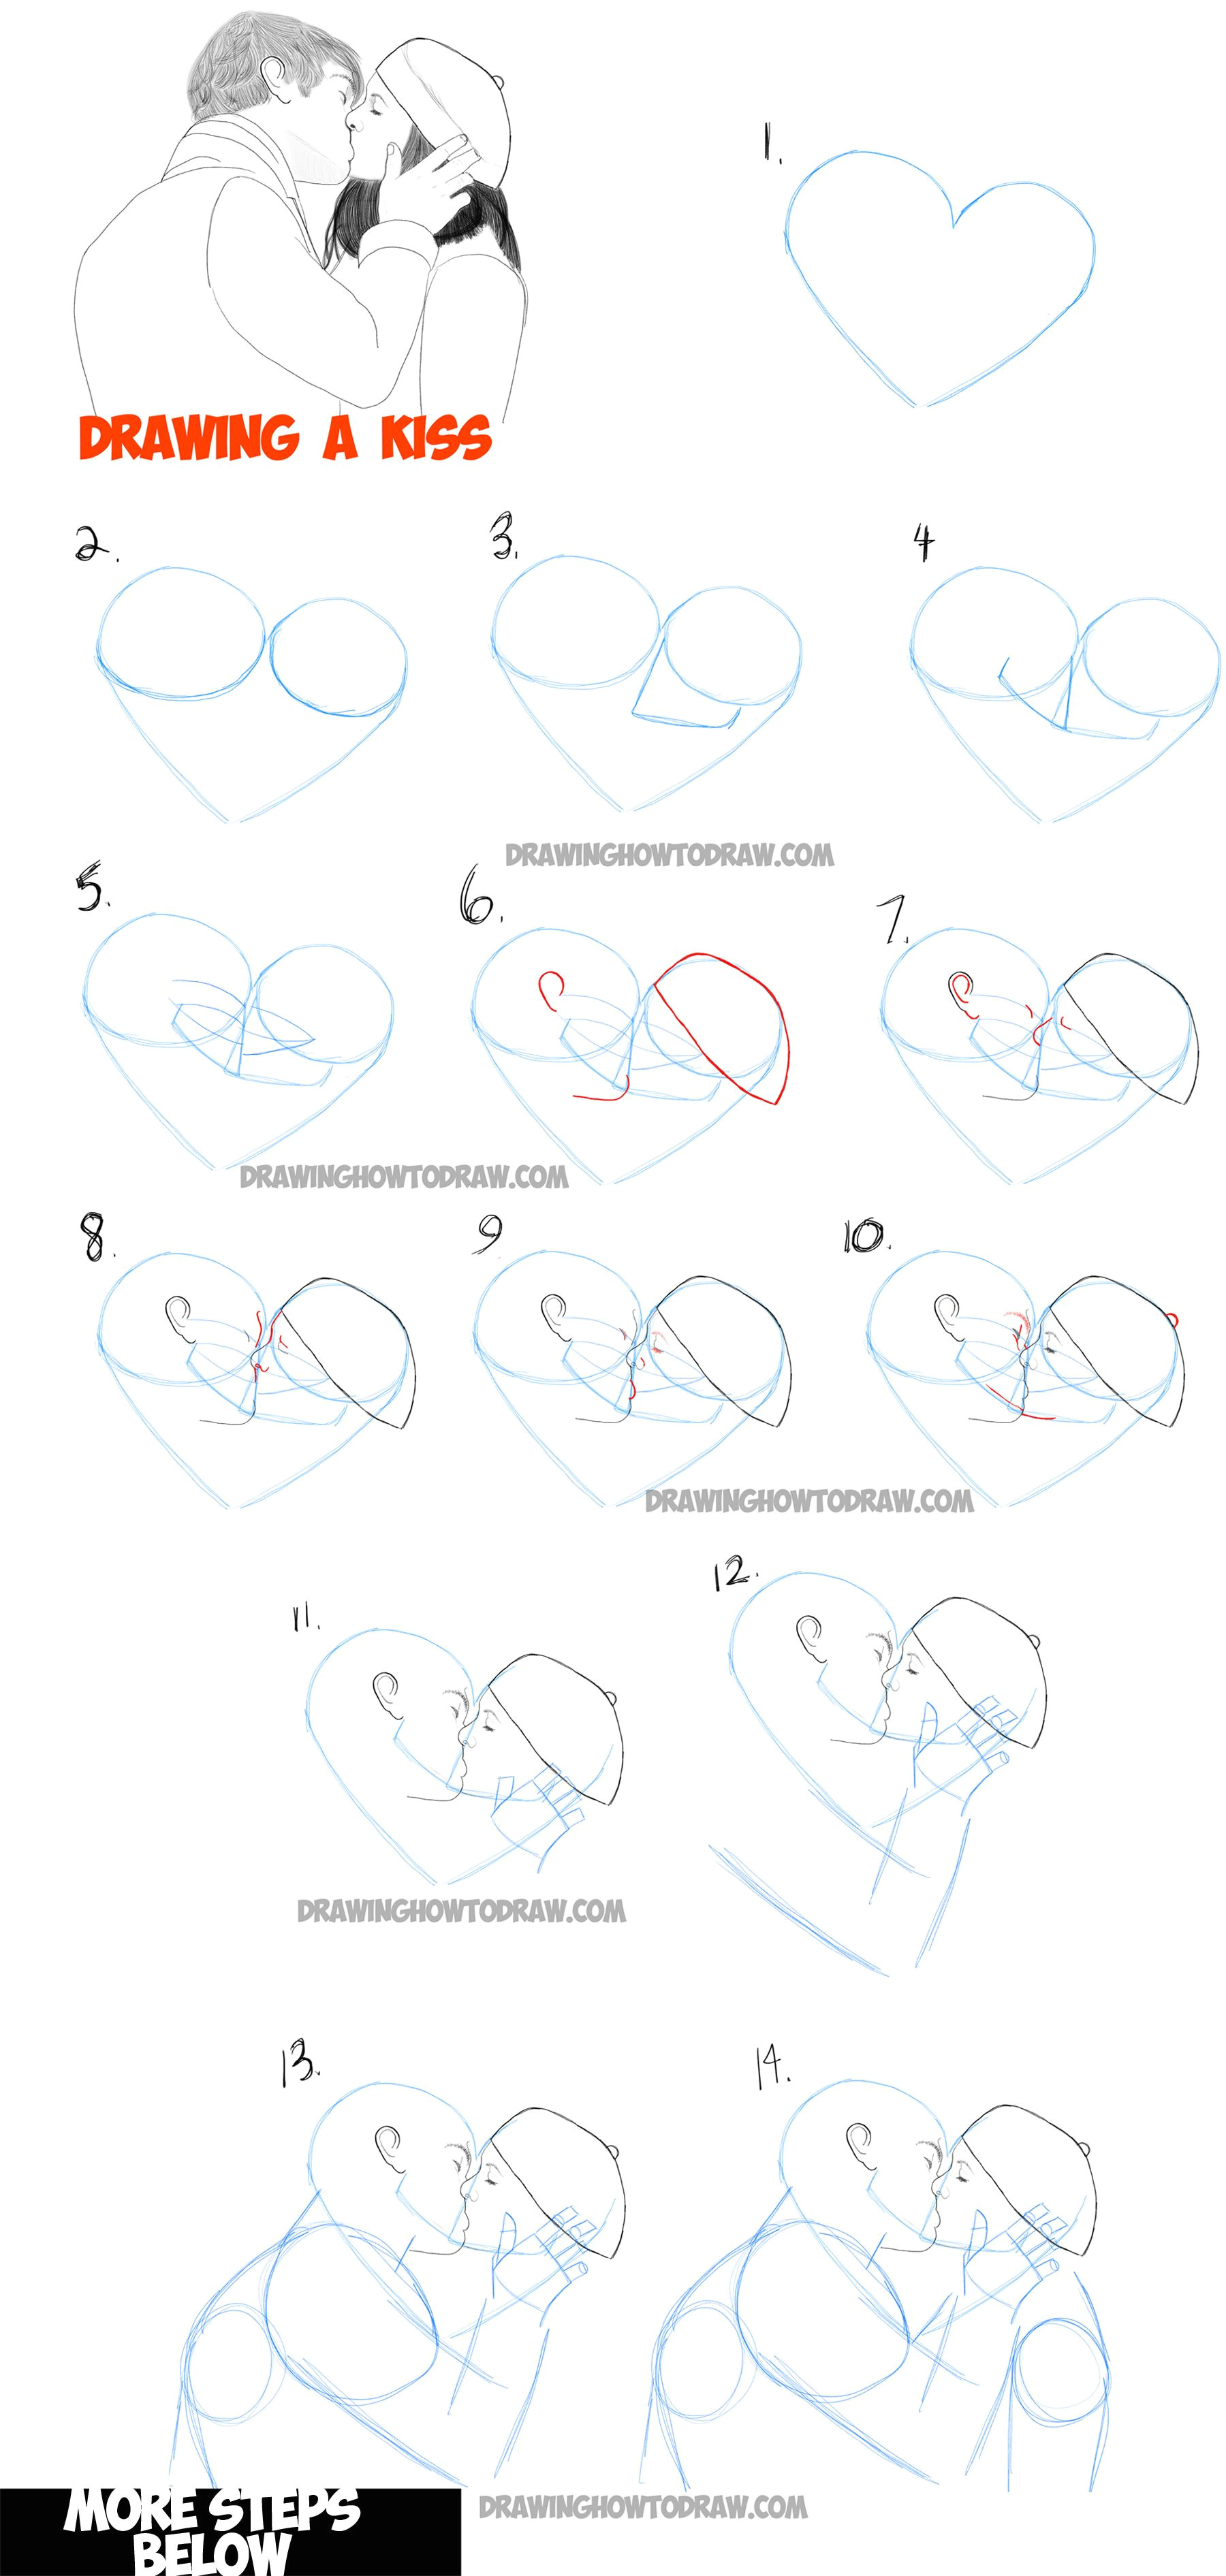 Drawing Kissing Tutorial Tumblr How to Draw Romantic Kisses Between Two Lovers Step by Step